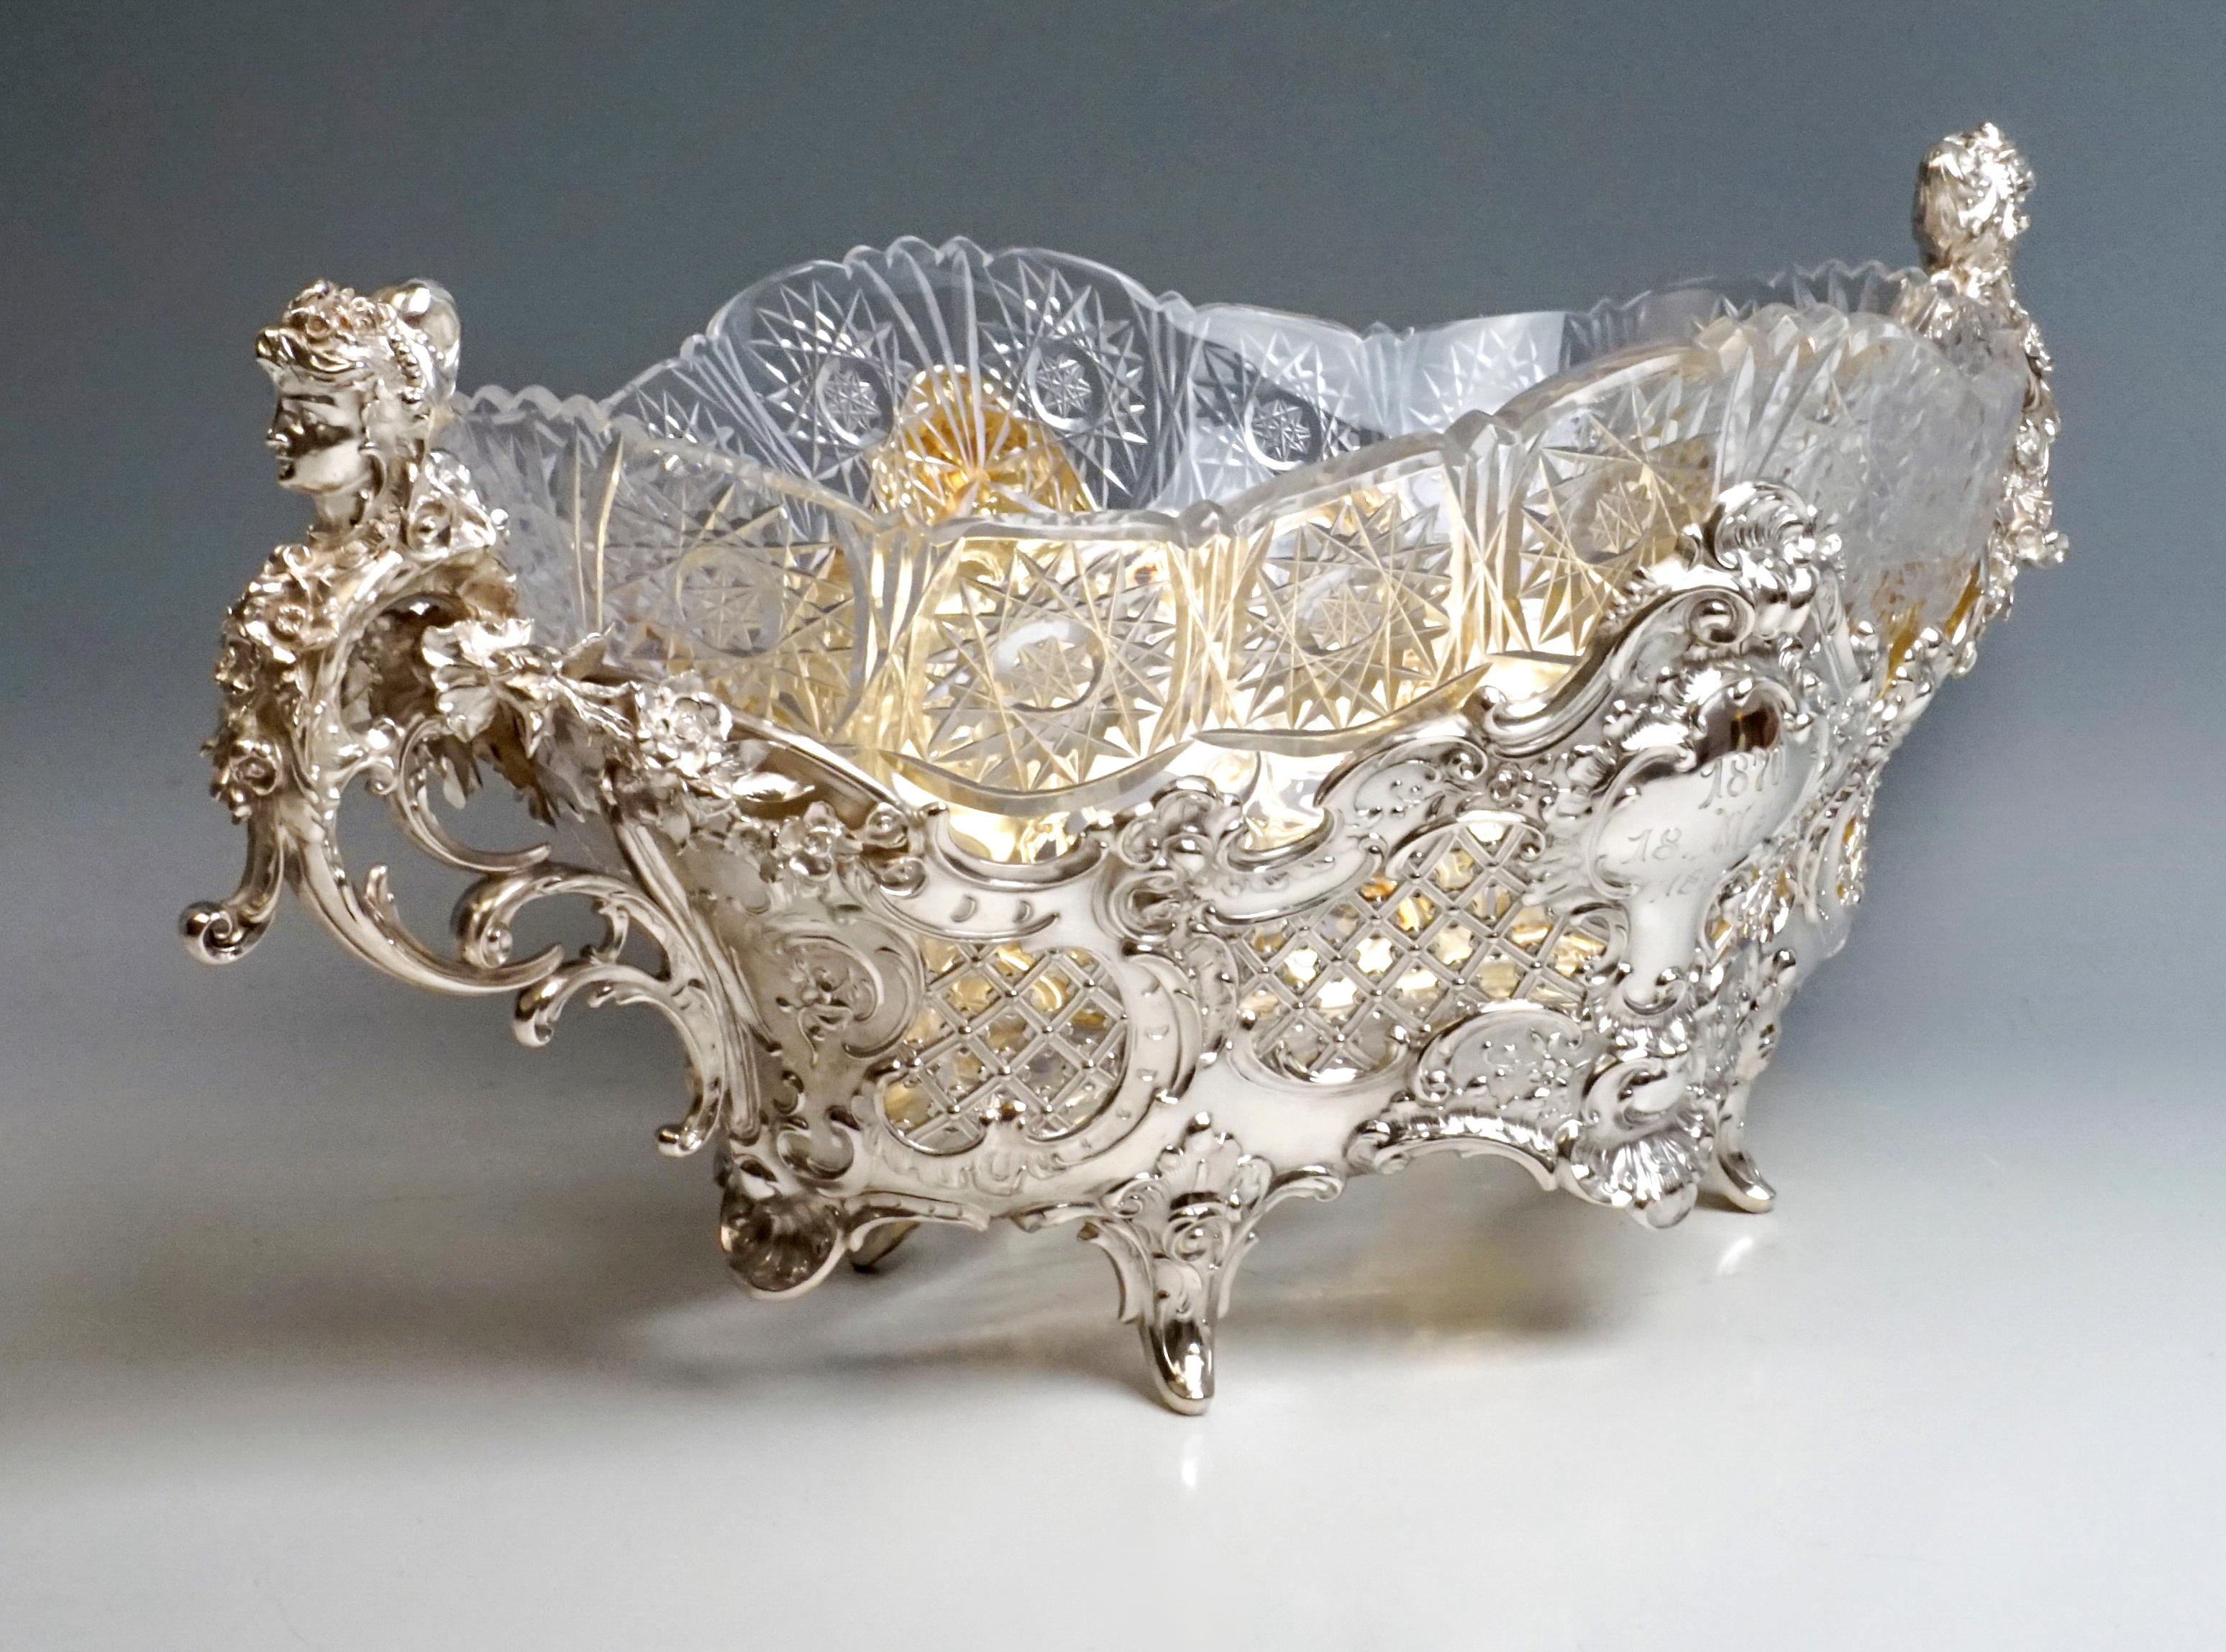 Late Victorian Large Silver Centerpiece Historicism Flower Bowl With Glass Liner, Germany, 1895